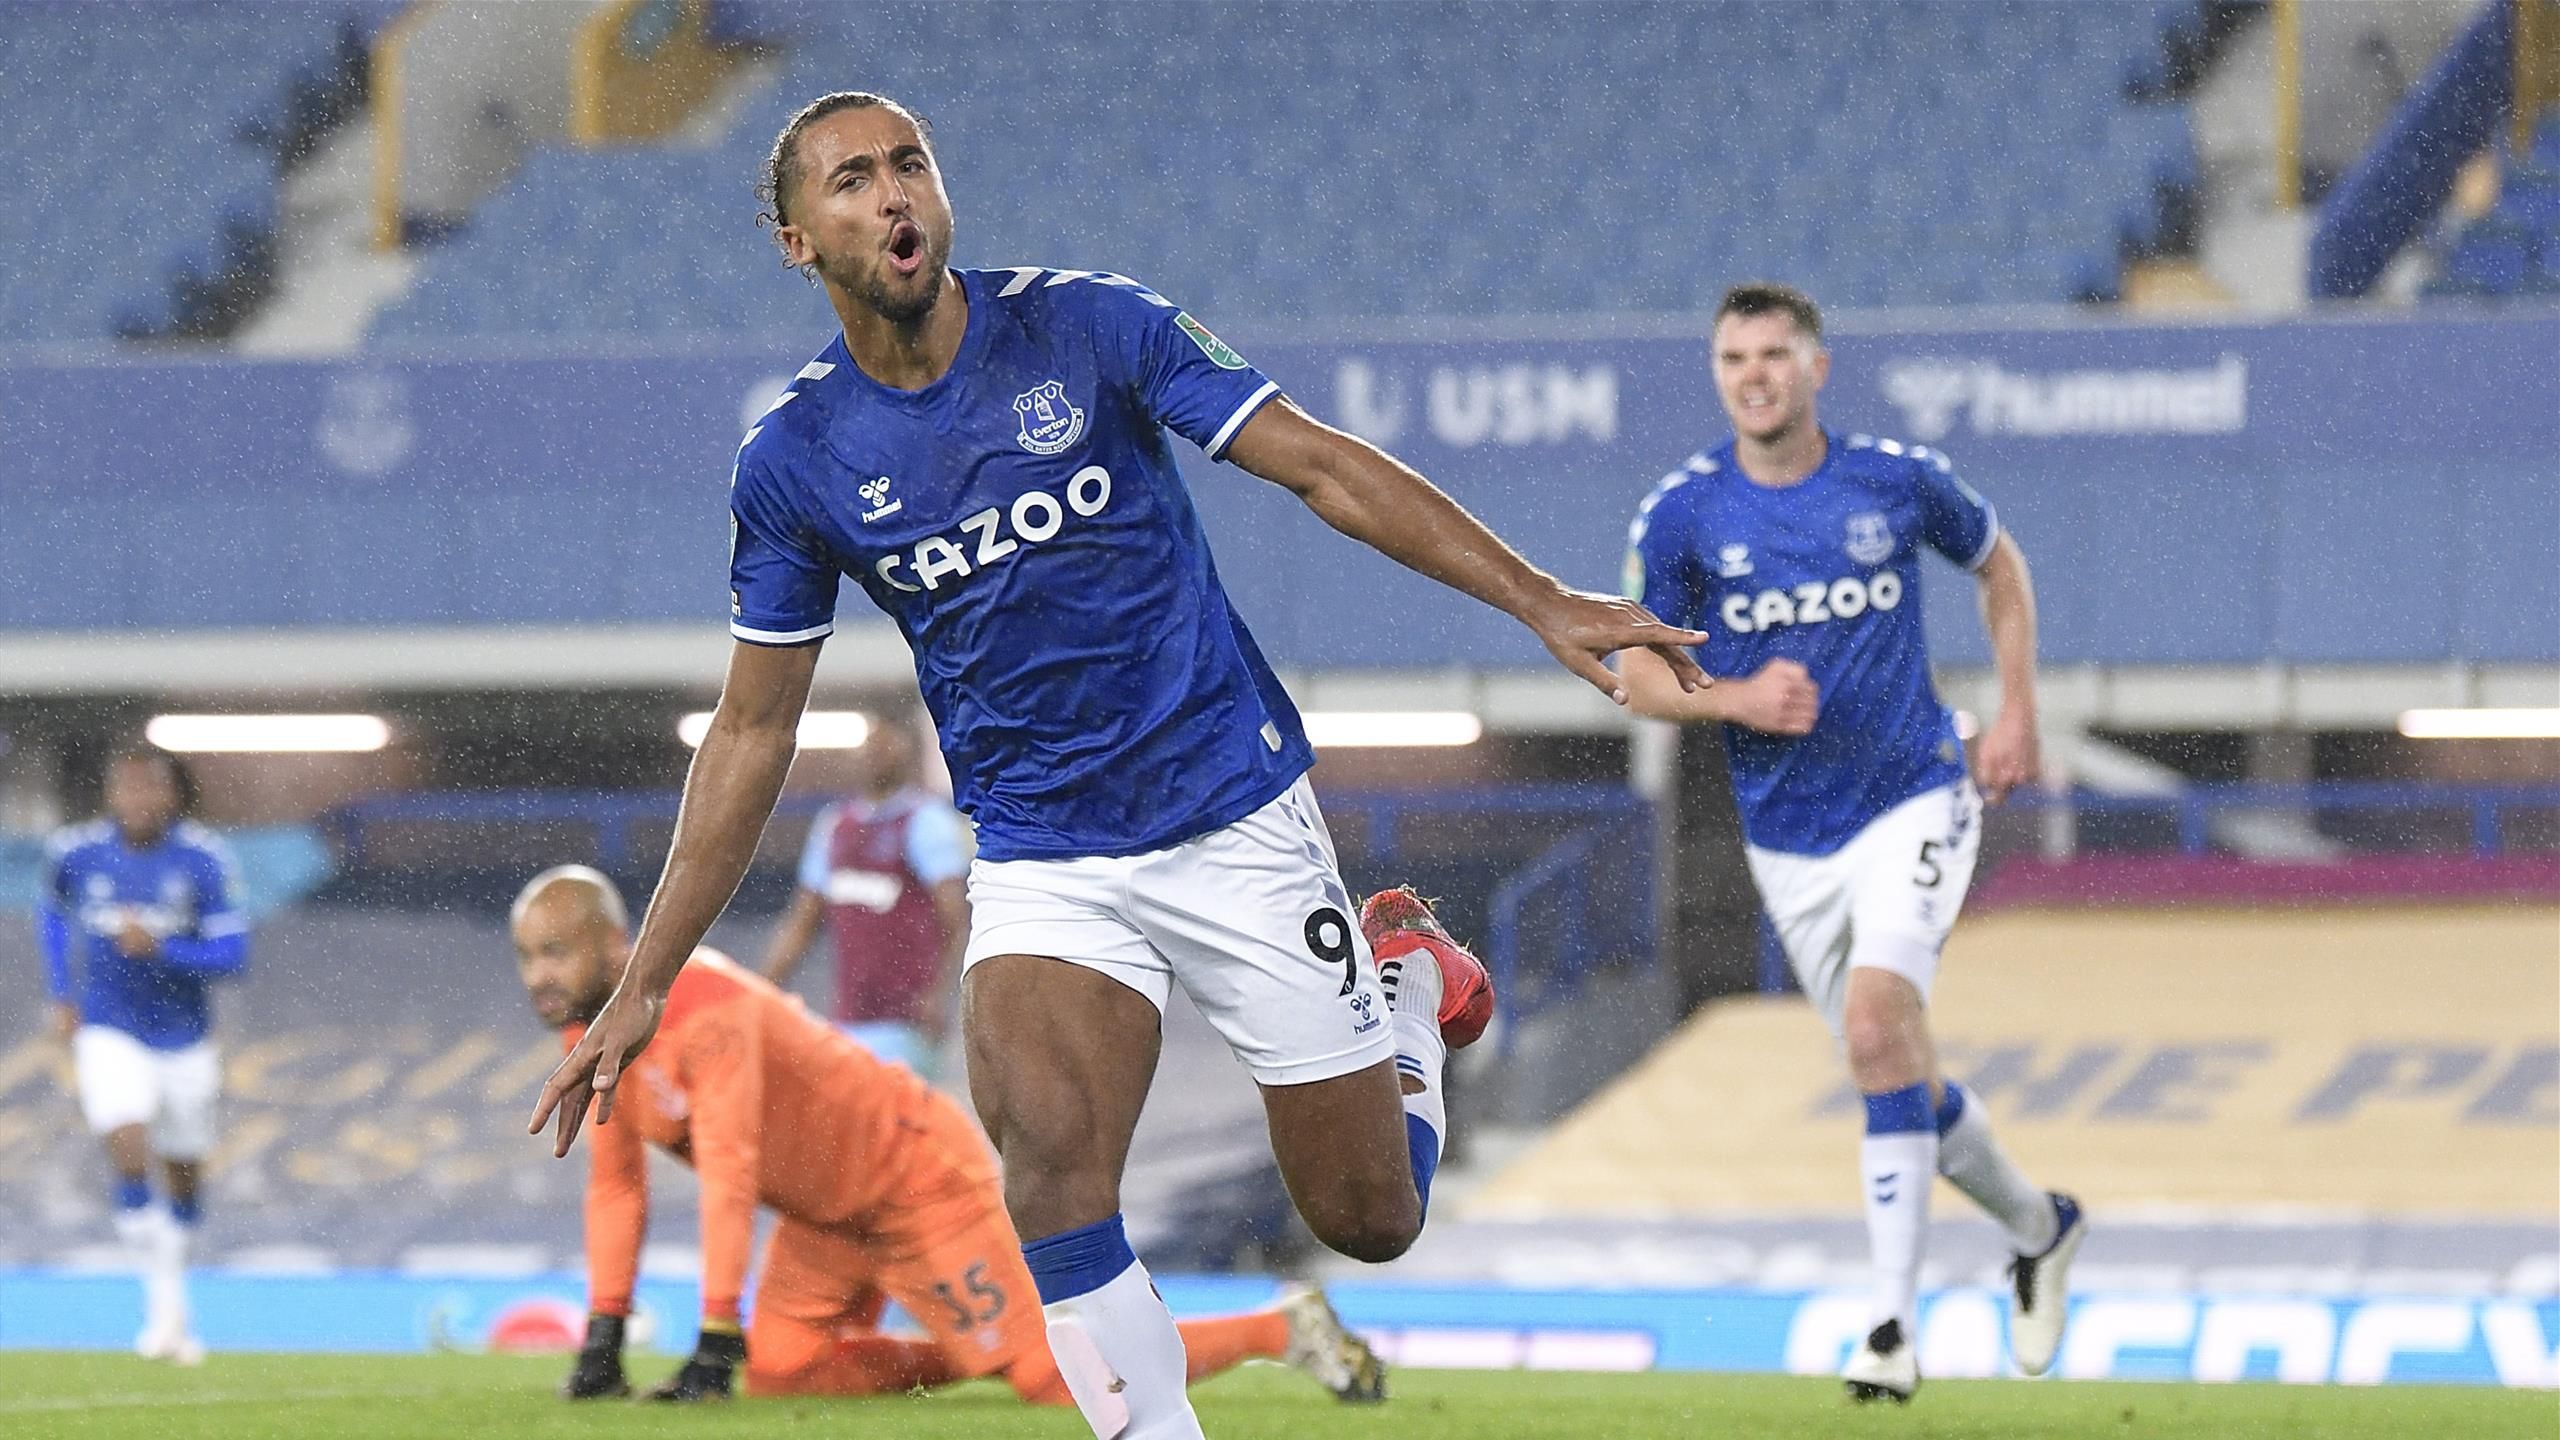 Dominic Calvert Lewin Continues His March Towards Everton Greatness